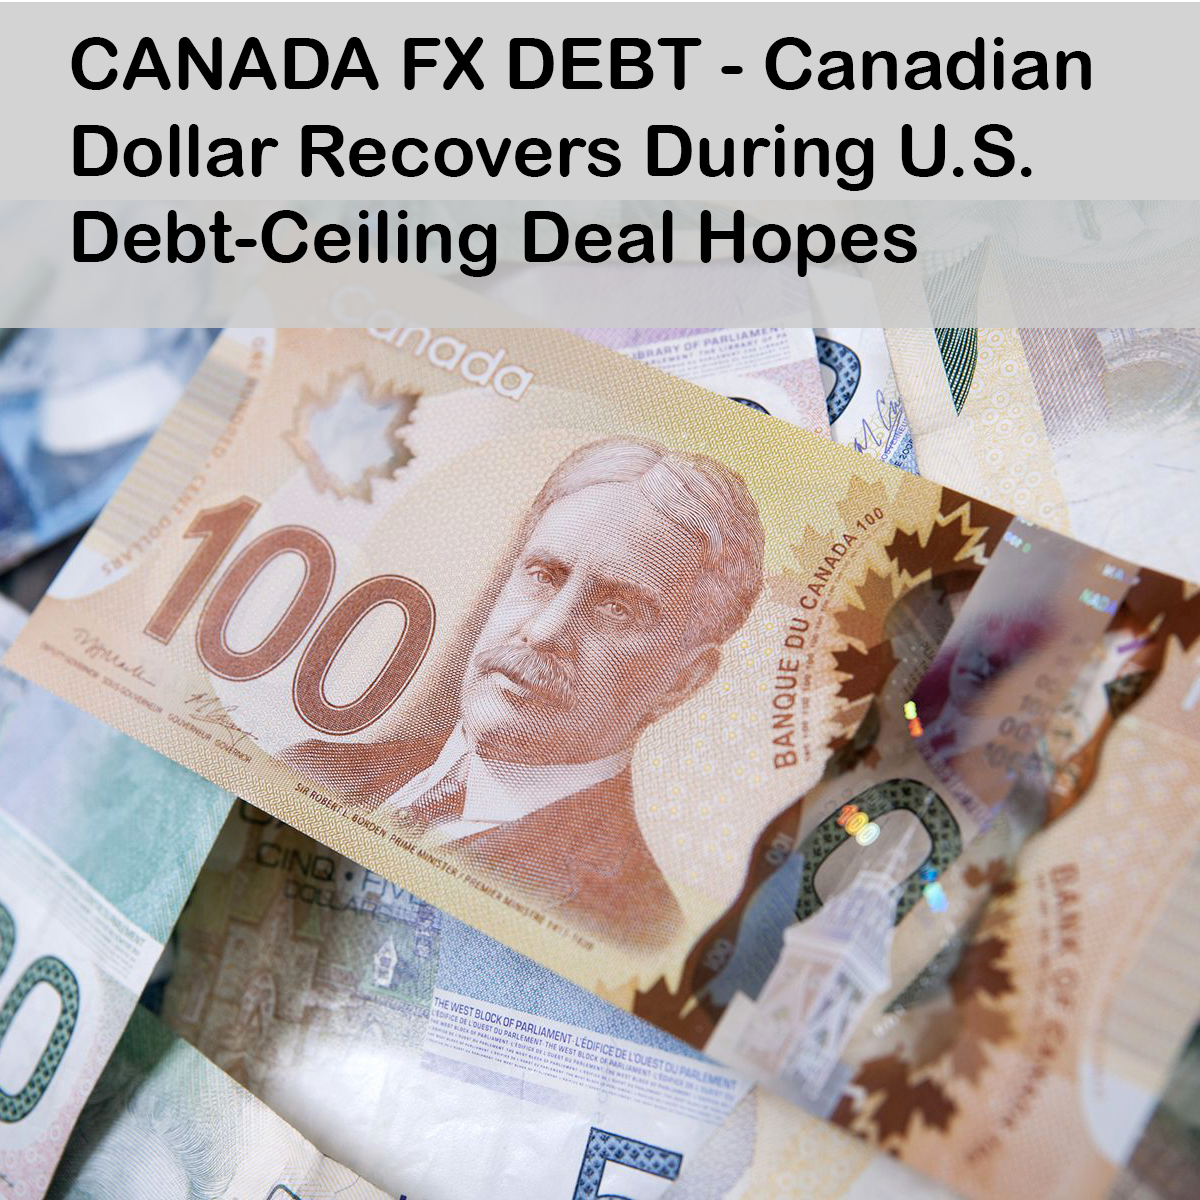 CANADA FX DEBT - Canadian Dollar Recovers During U.S. Debt-Ceiling Deal Hopes